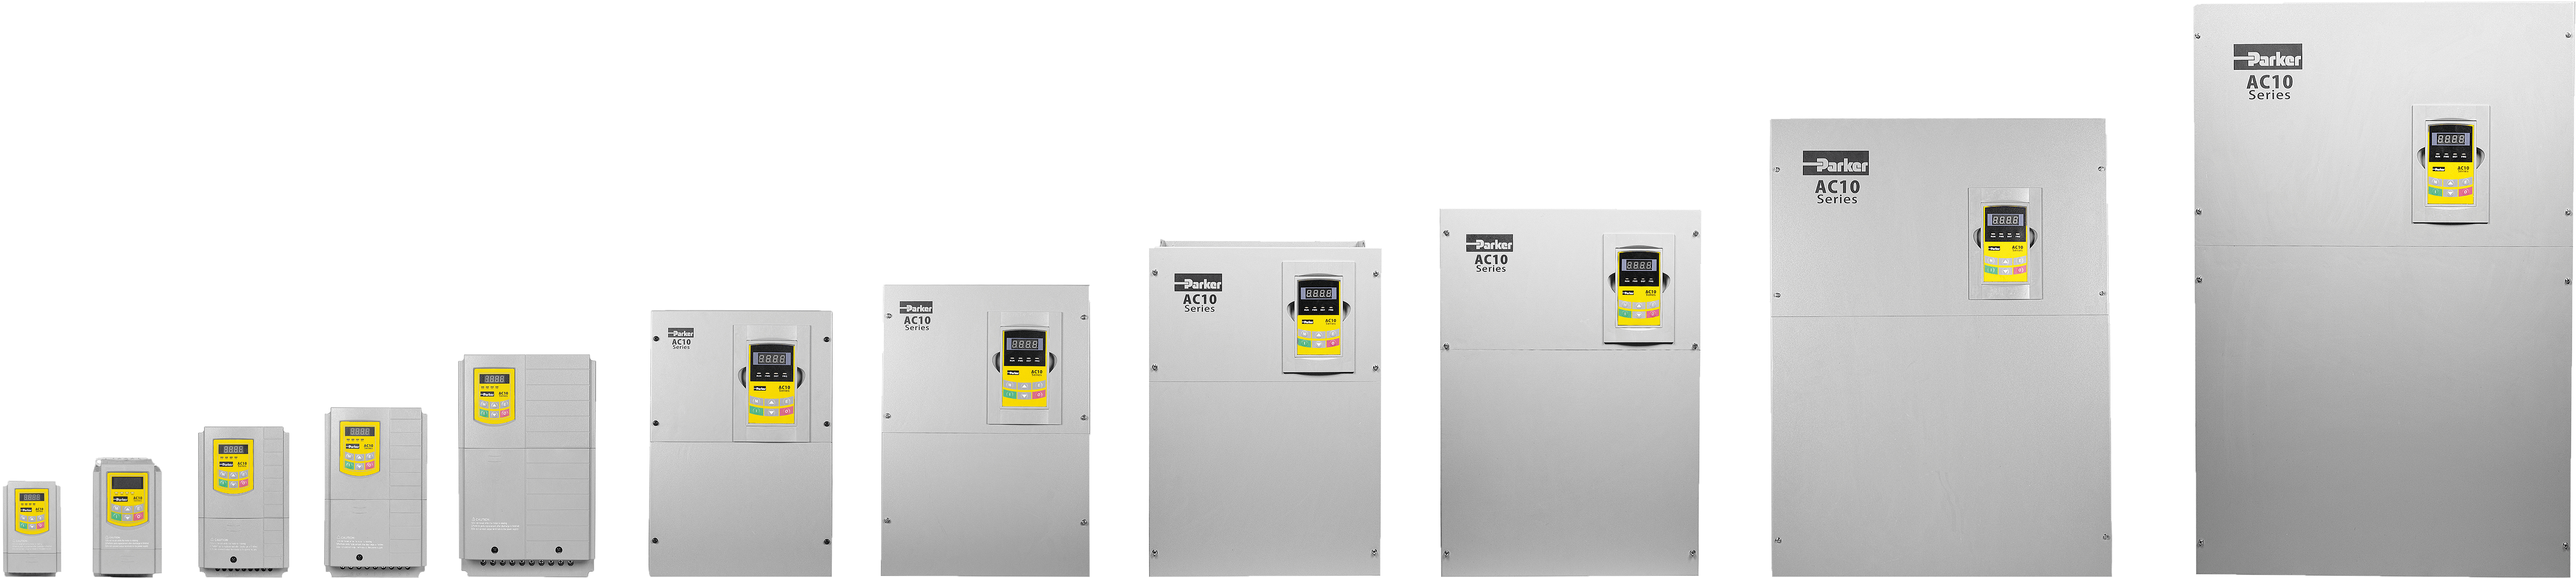 Parker AC10 Series asynchronous variable speed drives